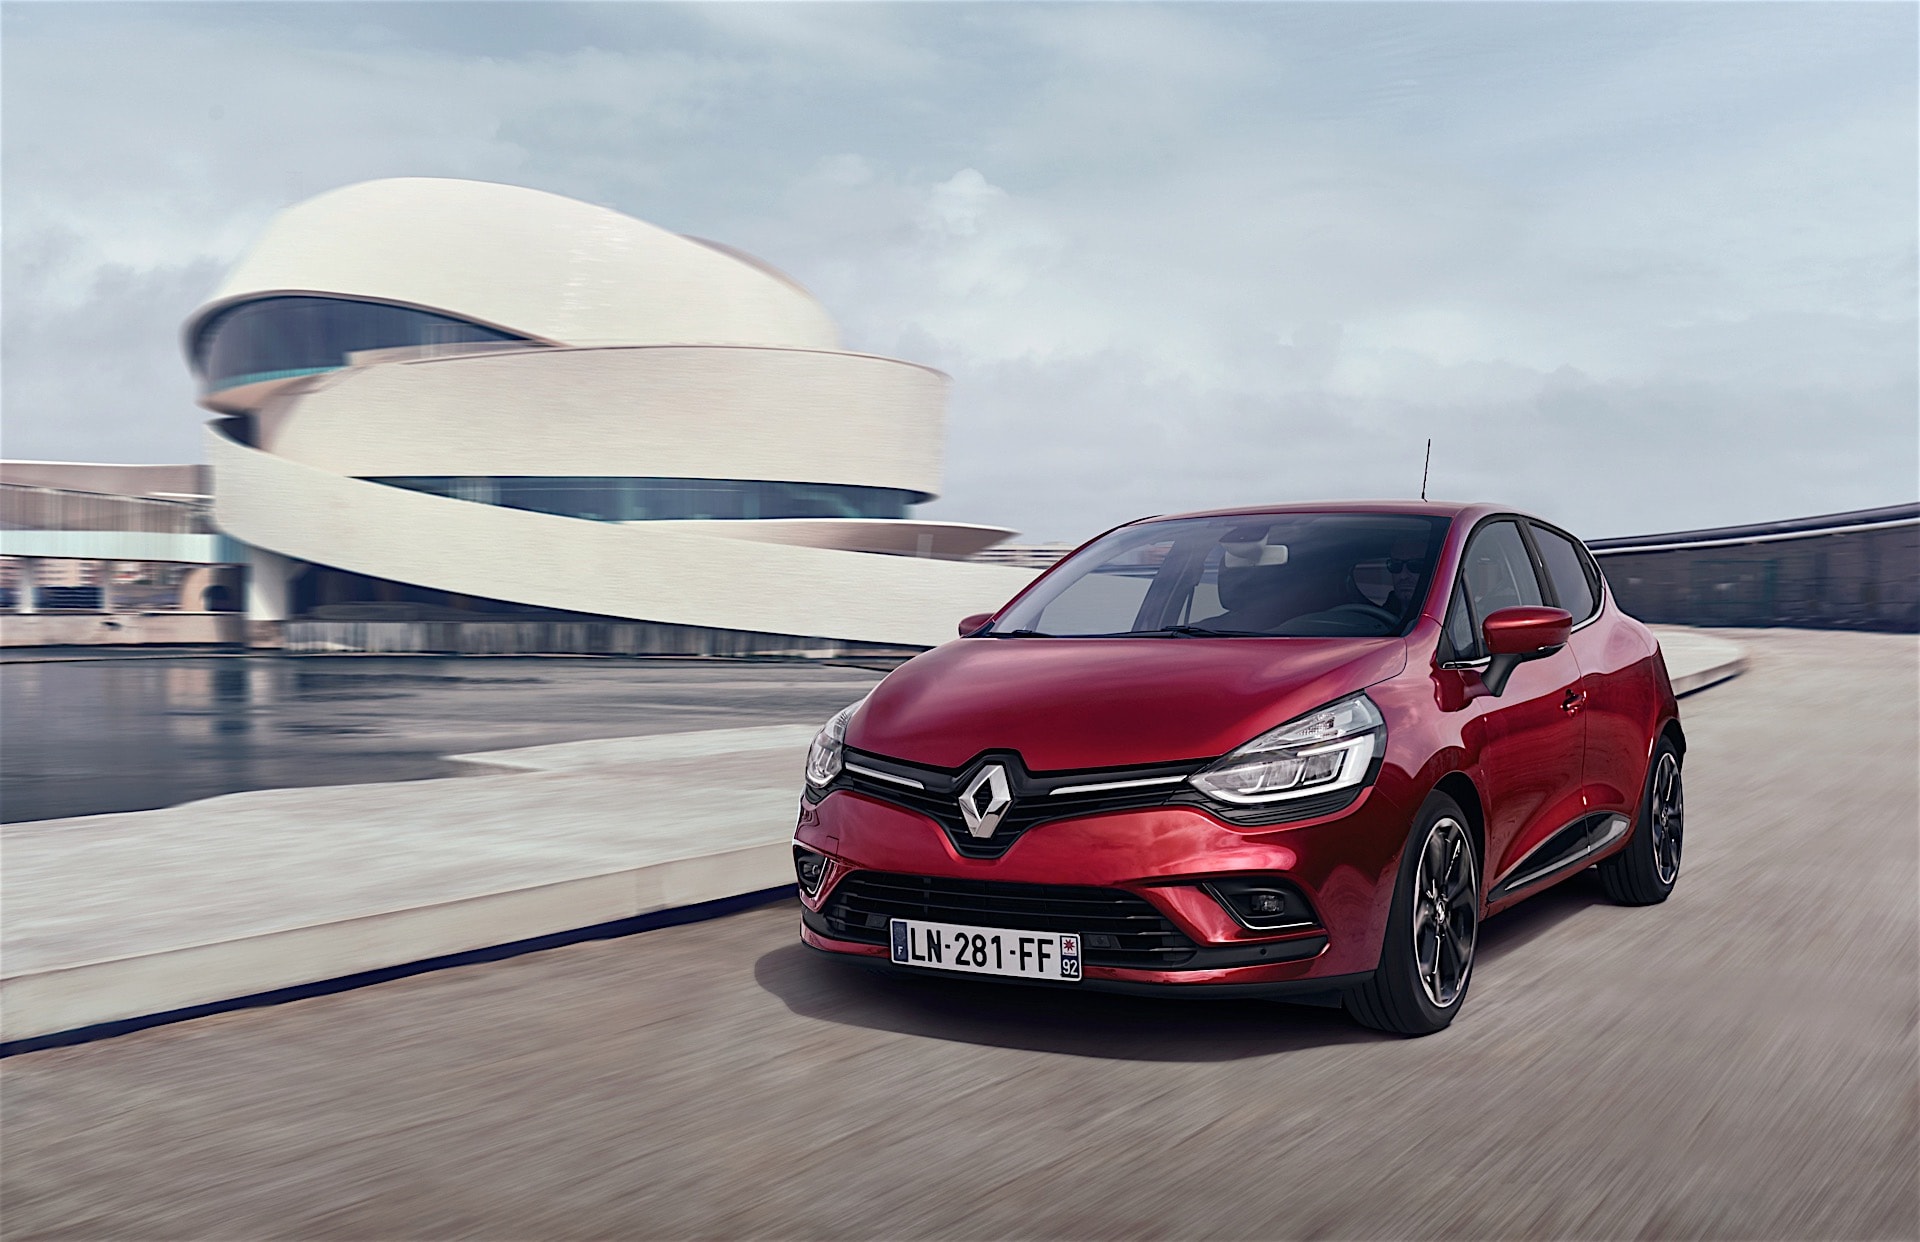 Onzuiver Haven Feest 2017 Renault Clio Facelift Revealed, Will Be Launched At Paris Motor Show -  autoevolution